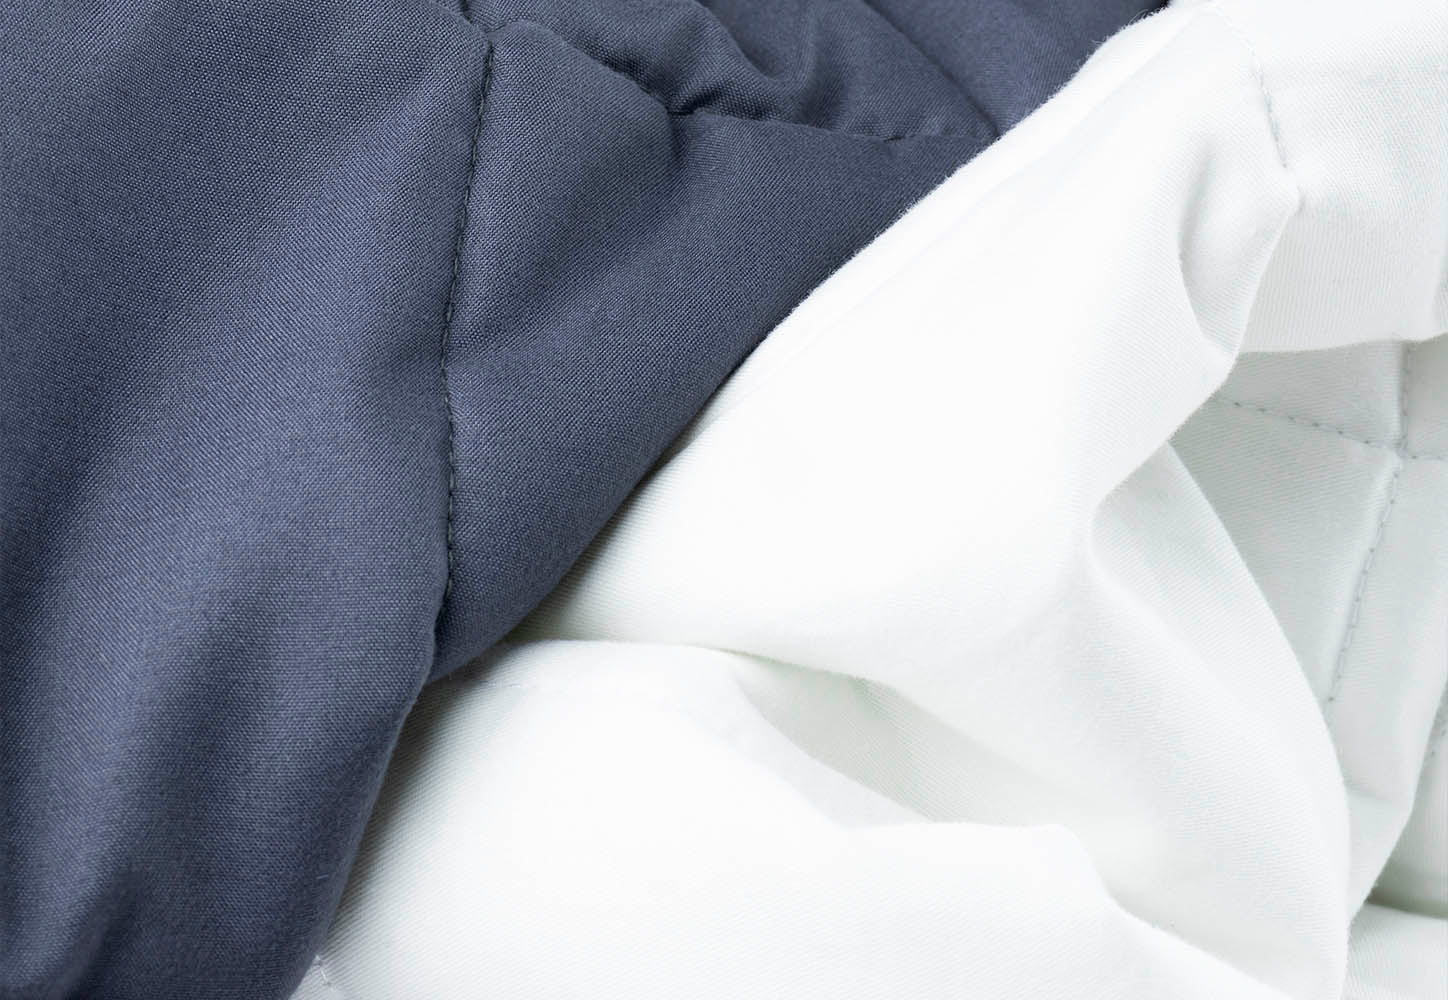 How to choose a weighted blanket?